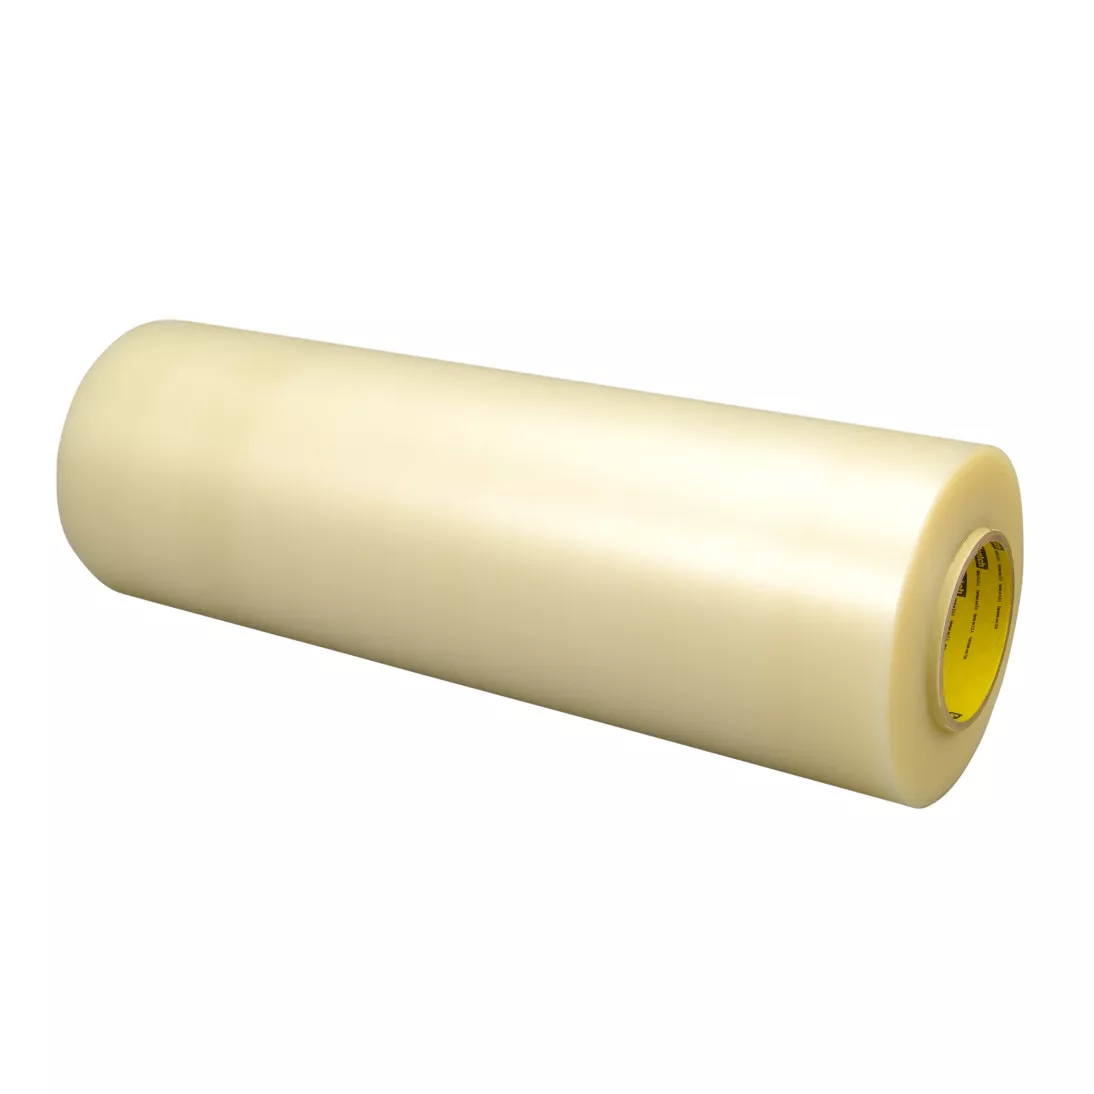 3M™ Adhesive Transfer Tape Double Linered 7962MP, Clear, 24 in x 36 in,
2 mil, 100 sheets per case